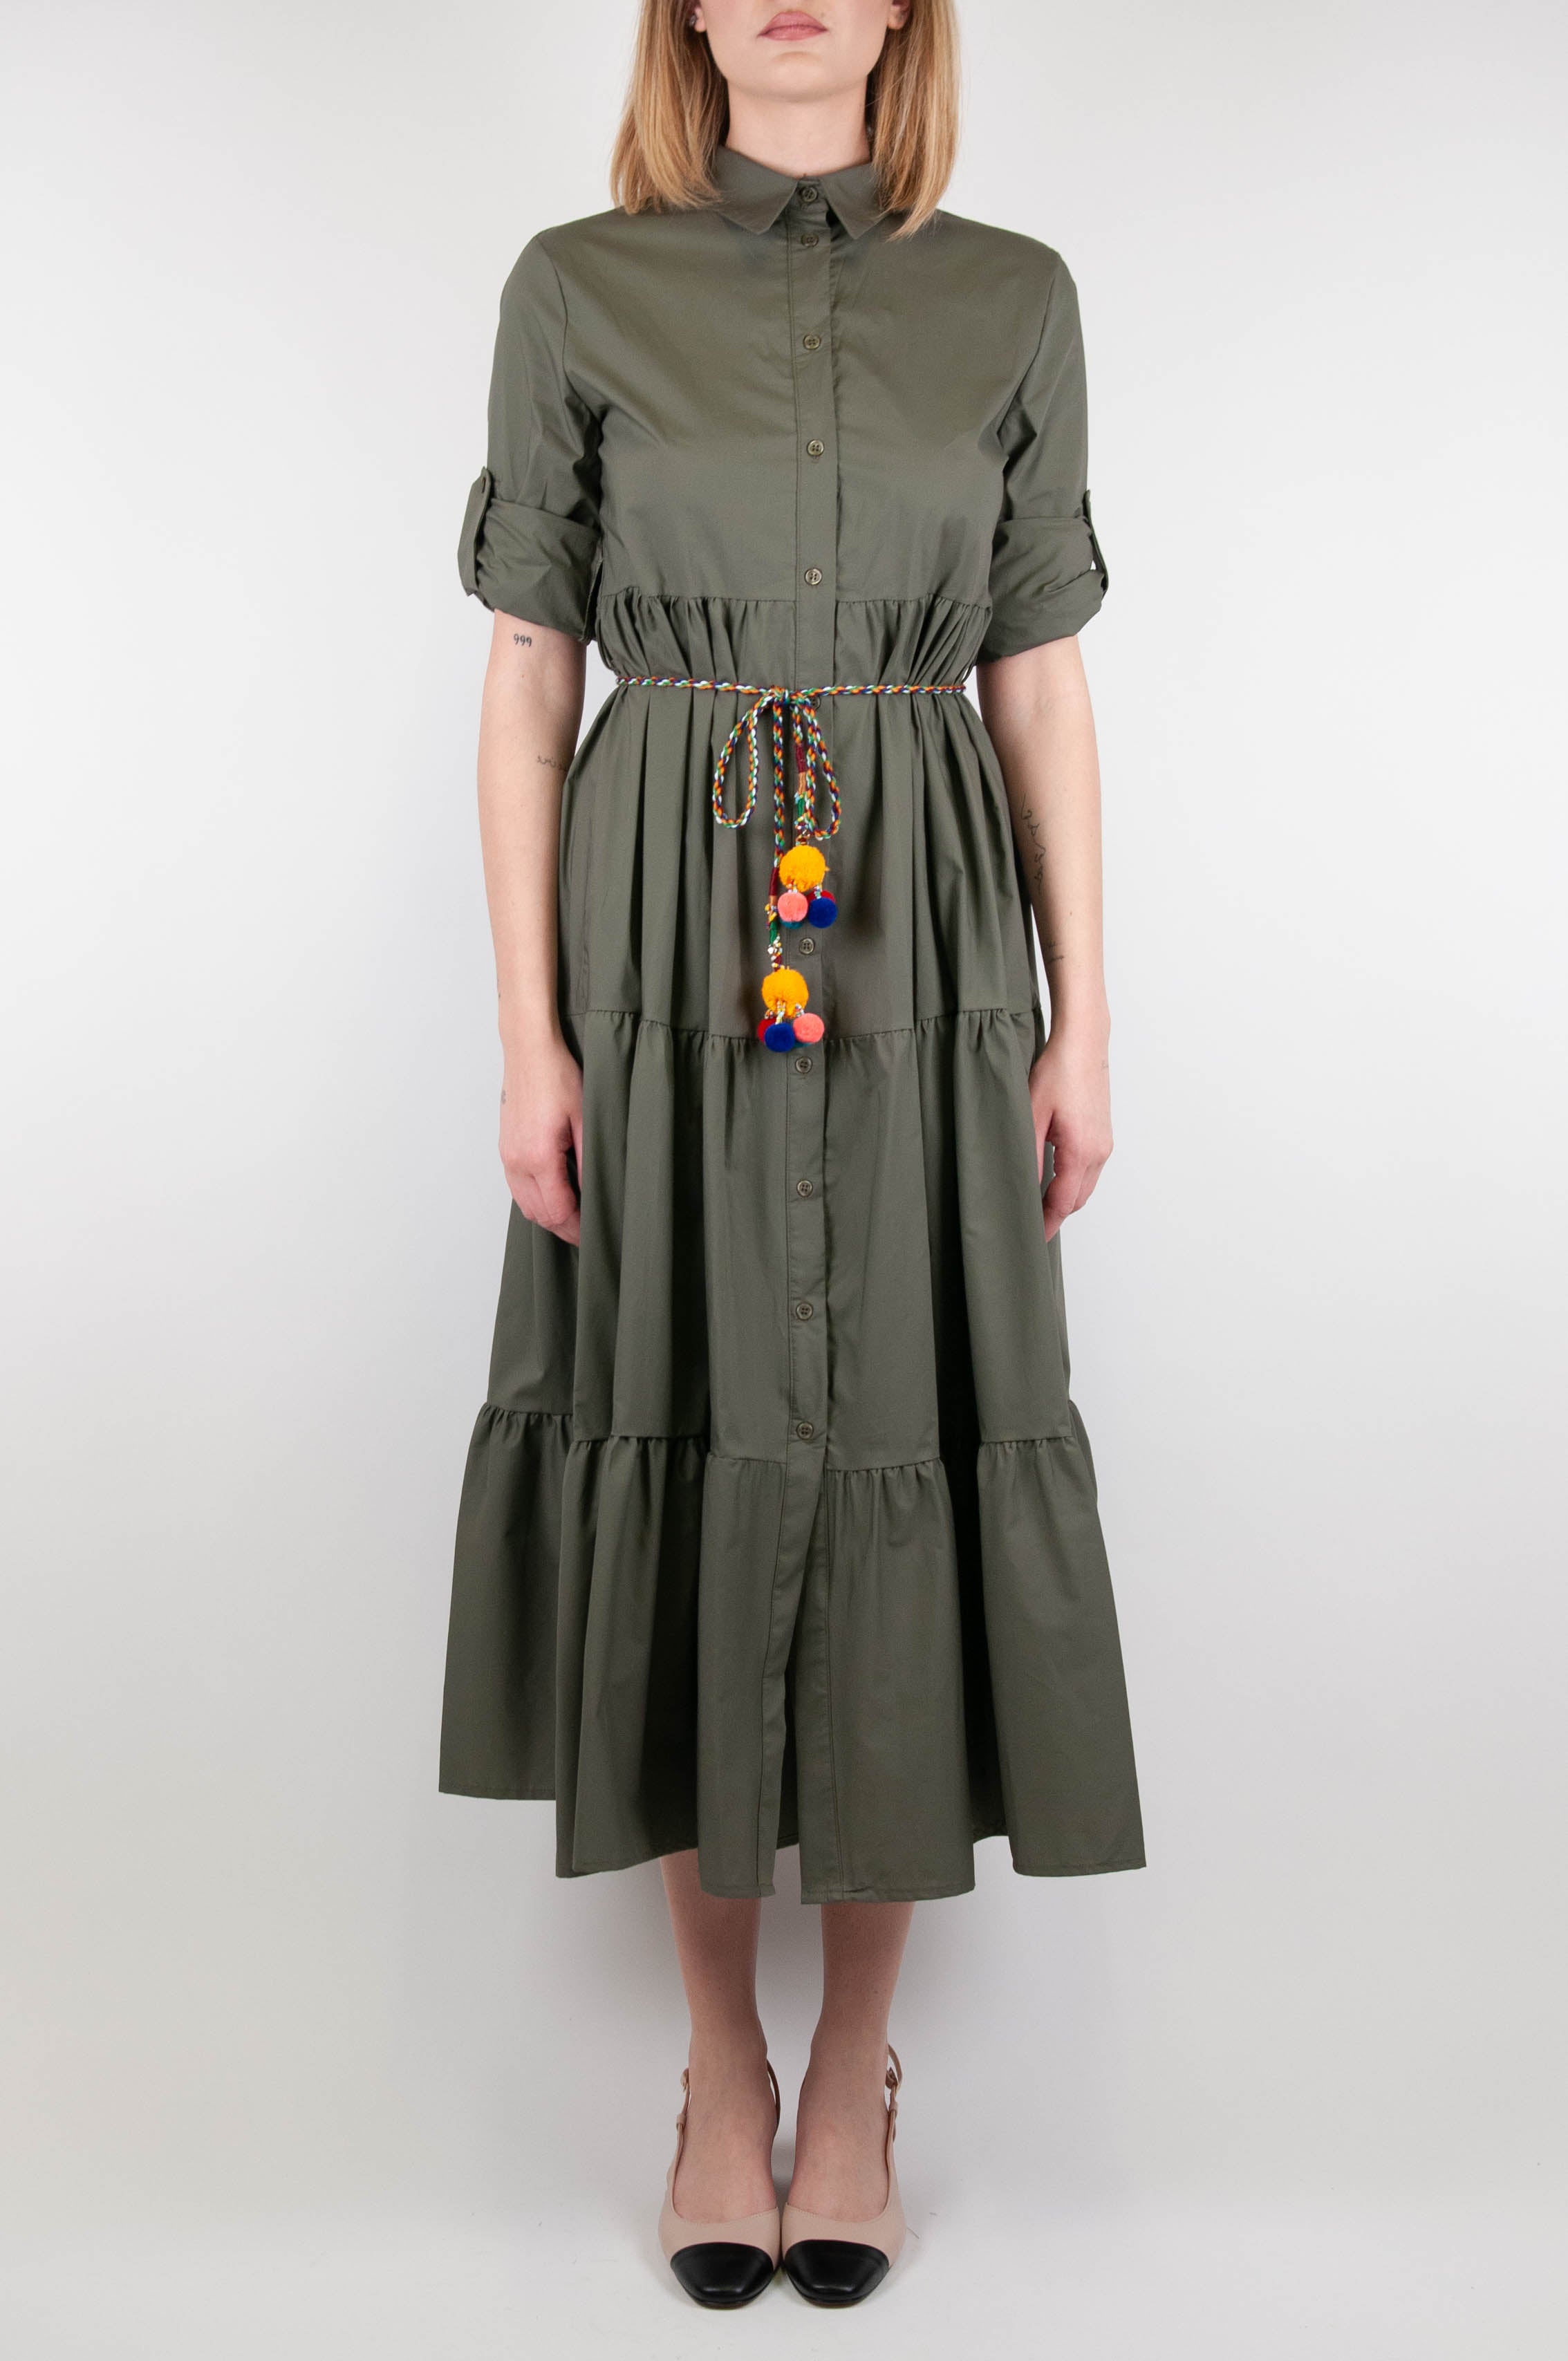 Dixie - Shirtdress with flounces and rope belt with pom poms